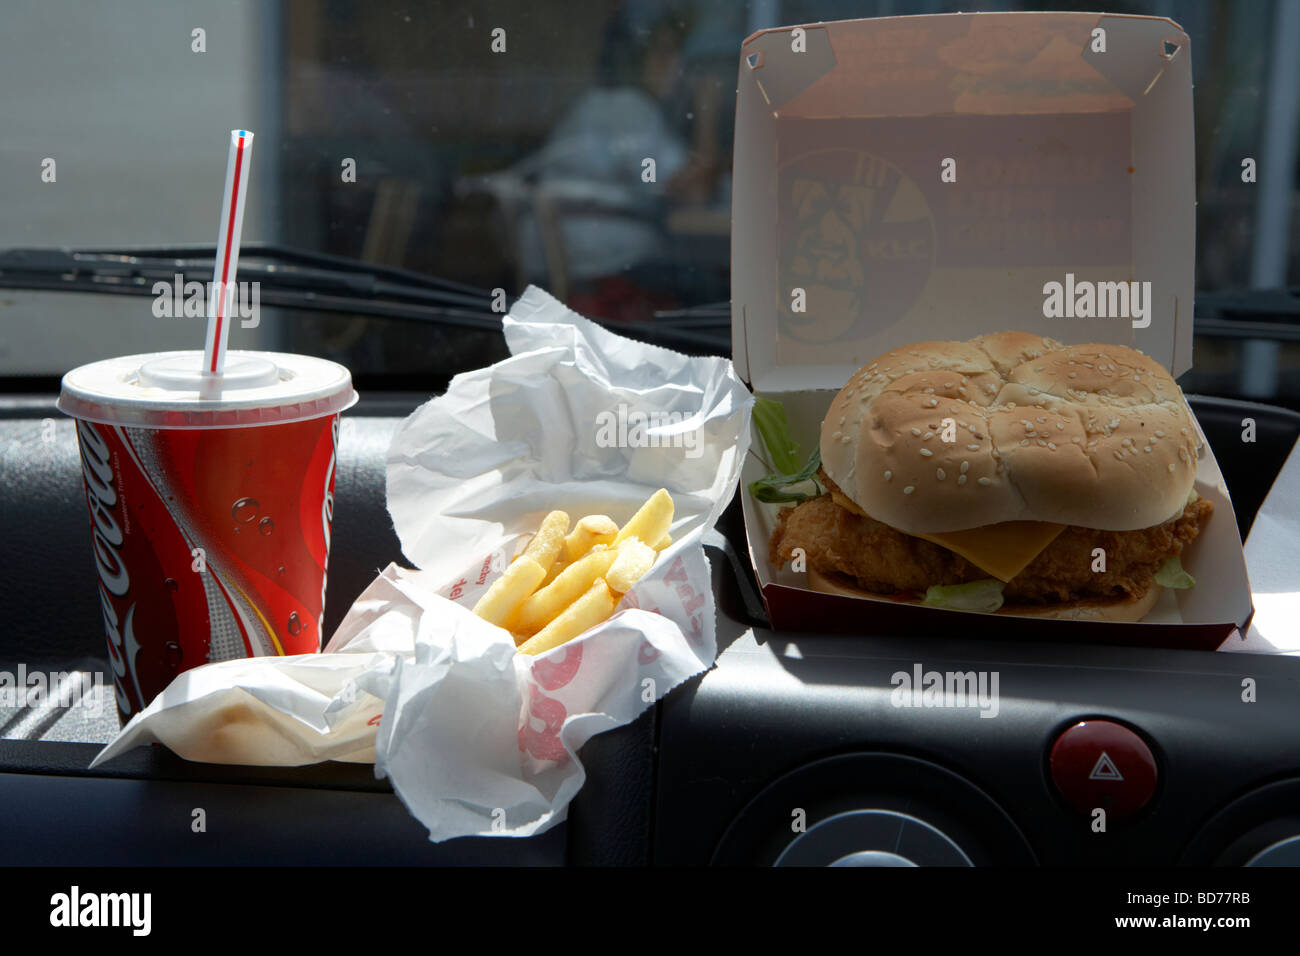 KFC burger fries and coke on the dashboard of a car van having quick fast food lunch Stock Photo